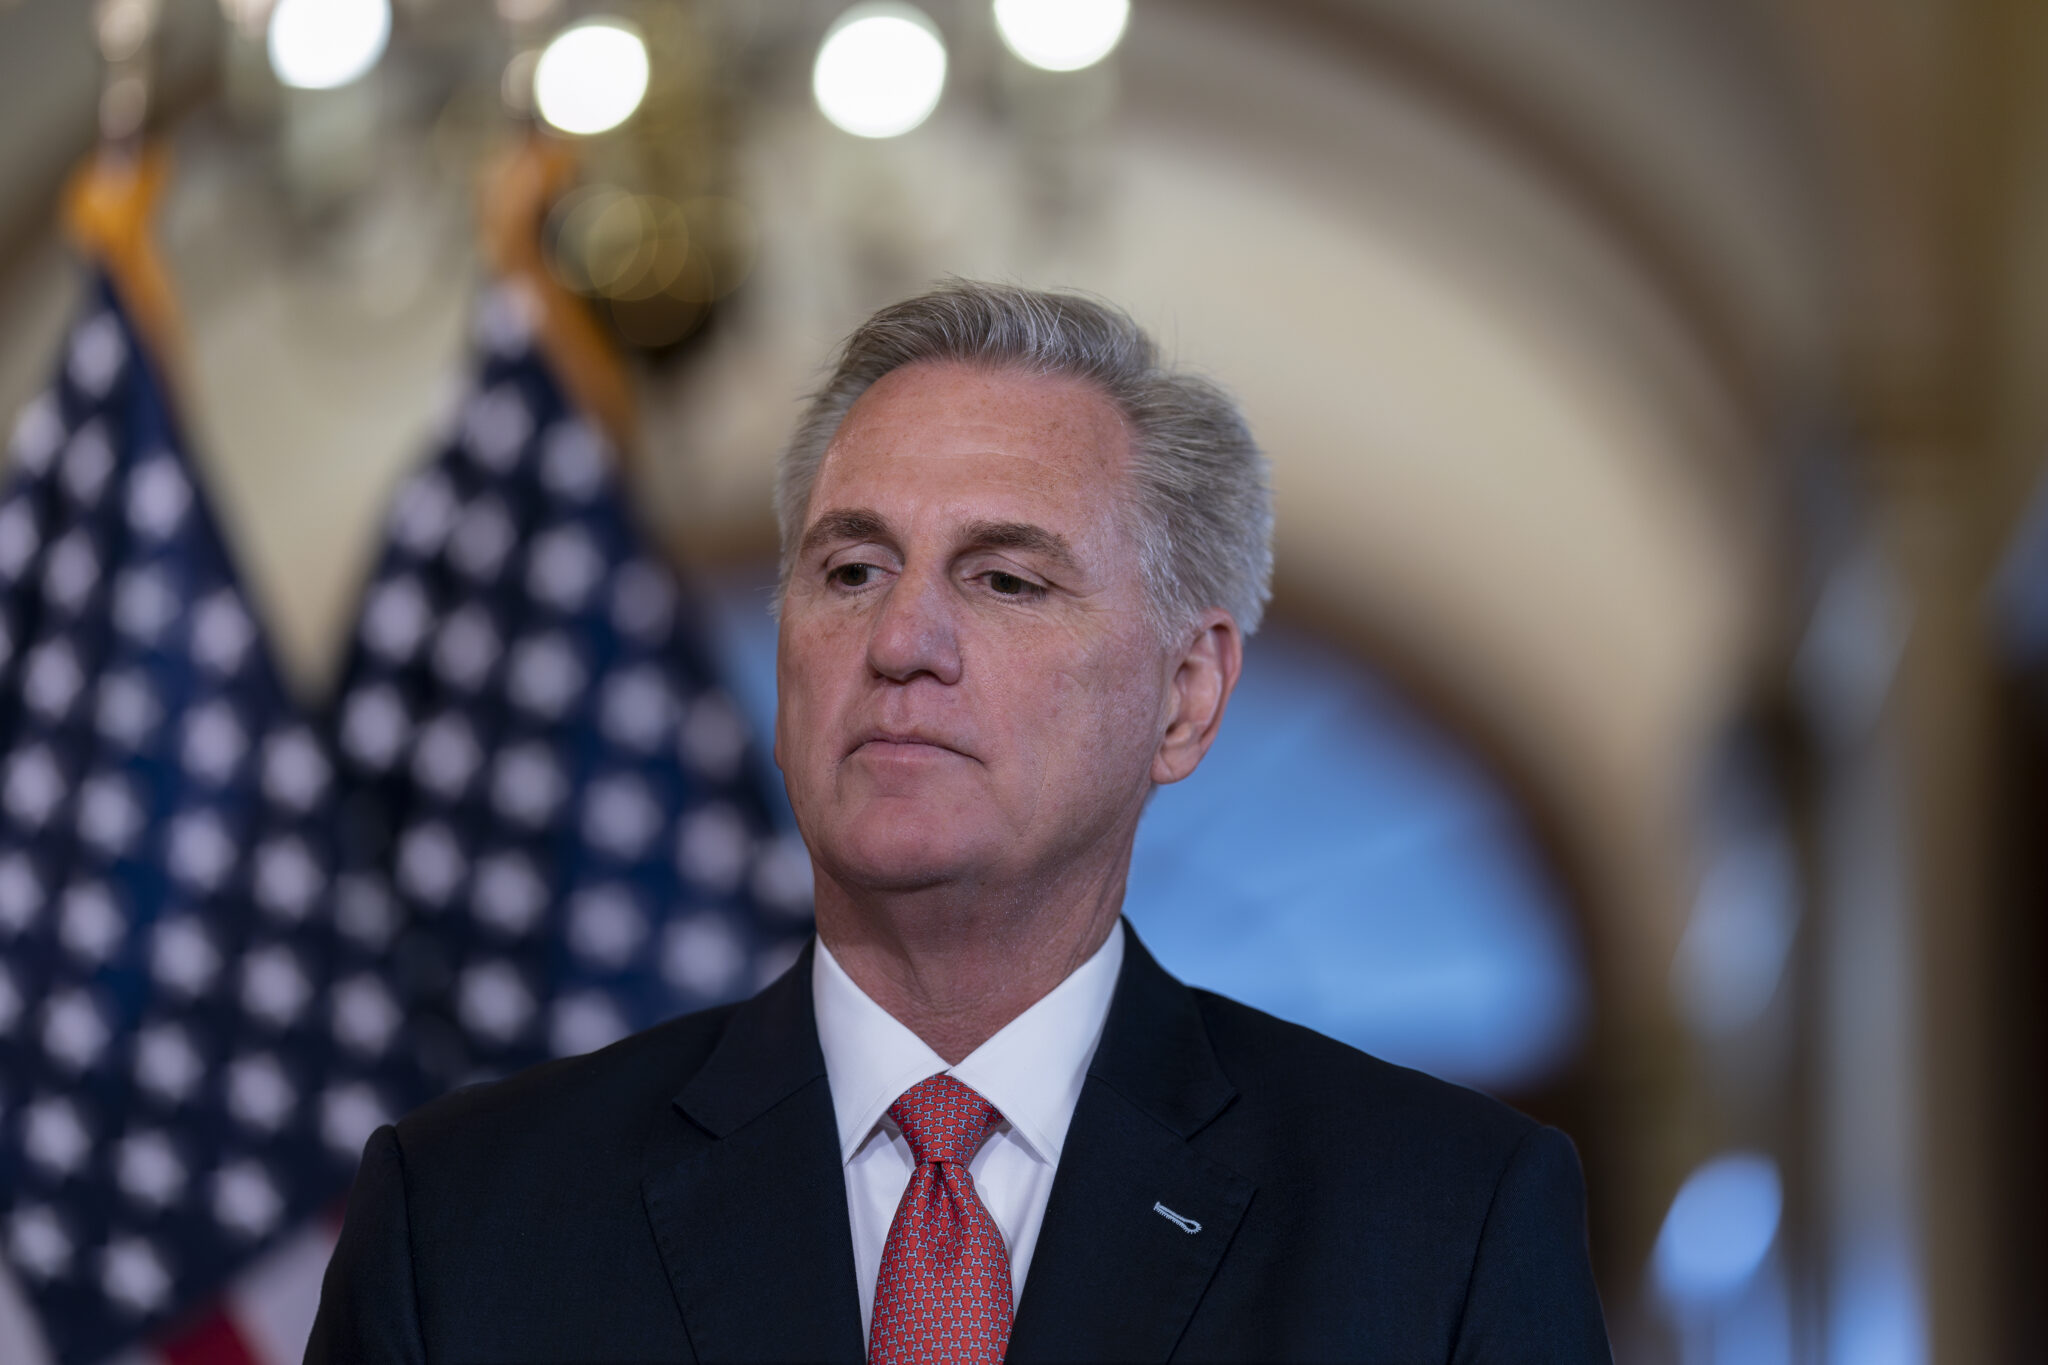 Speaker McCarthy Scoffs at Gaetz’s Threats to Oust Him: ‘Oh My God, Someone Tweeted About Me?’ (mediaite.com)